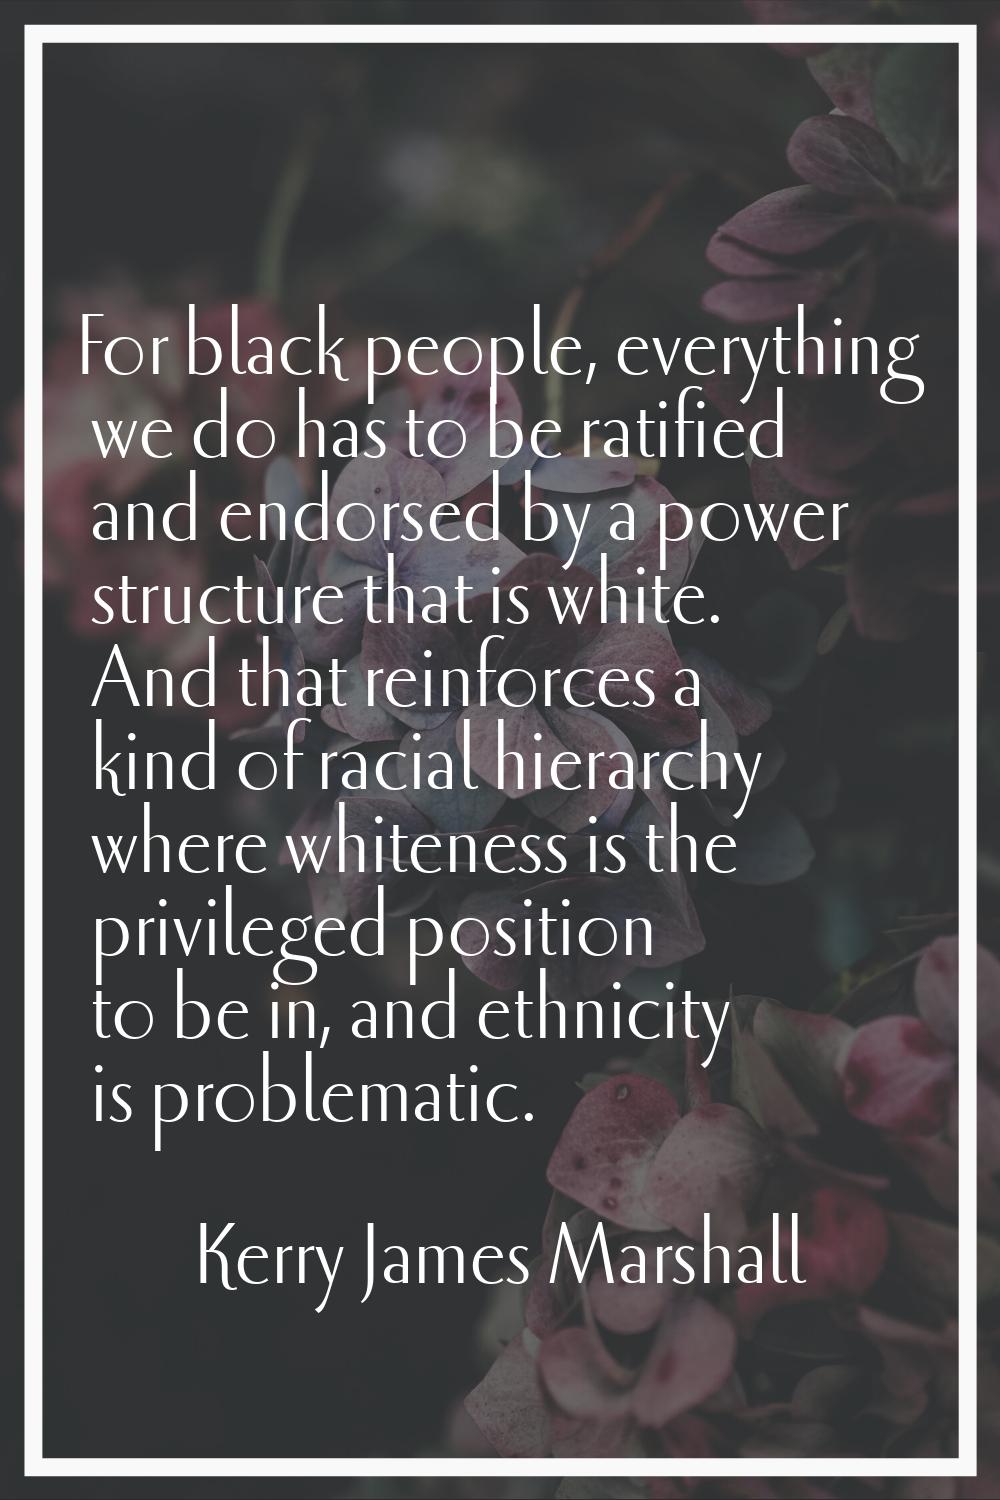 For black people, everything we do has to be ratified and endorsed by a power structure that is whi